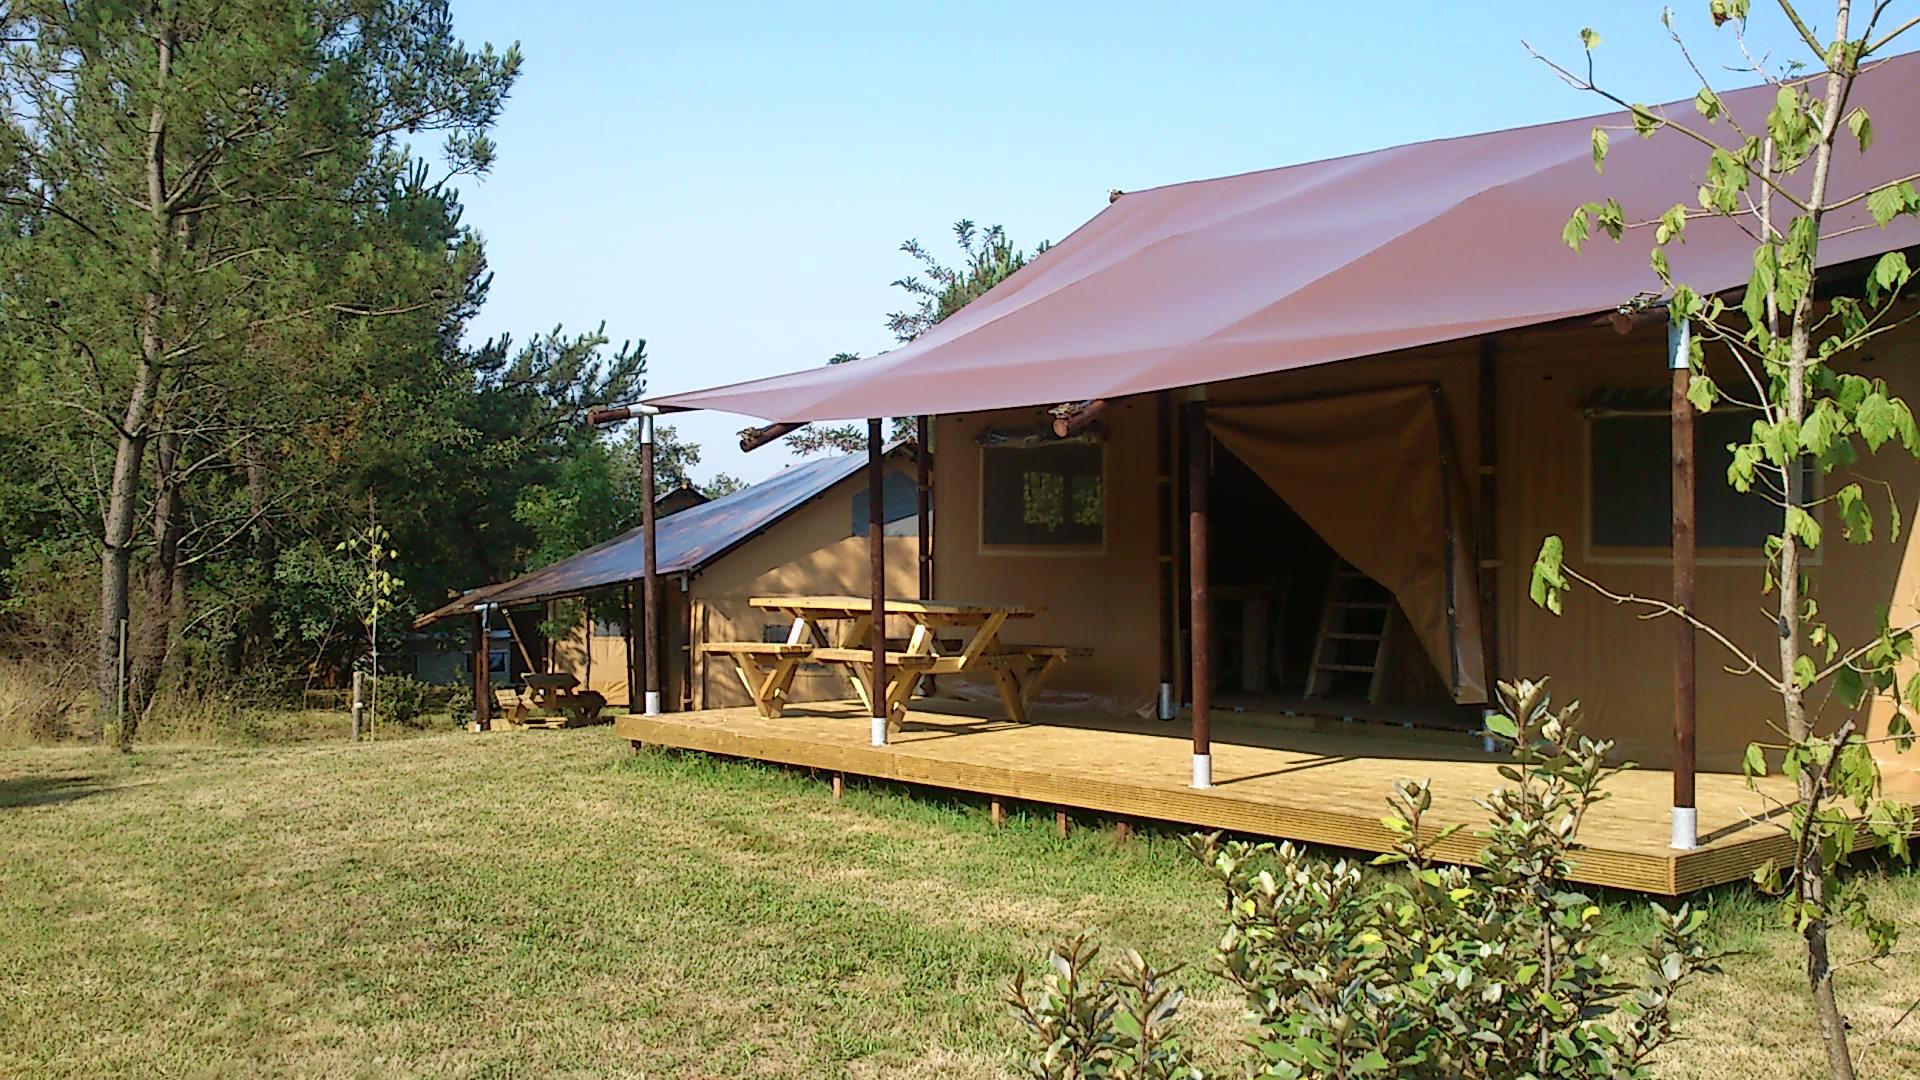 Huuraccommodatie - Tent Lodge Luxe - Camping Las Patrasses